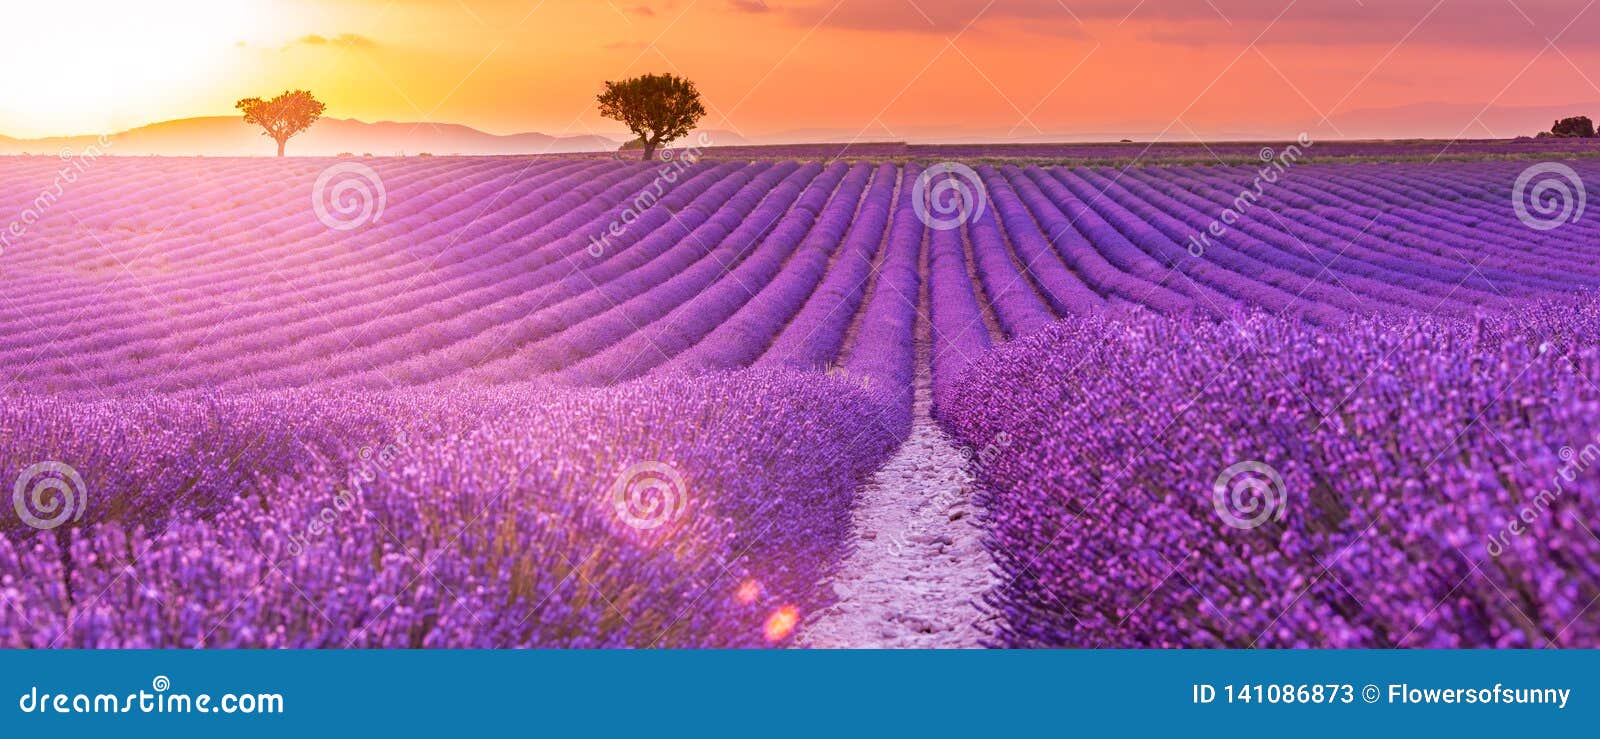 Sunrise Over Blooming Fields of Lavender on the Valensole Plateau in ...